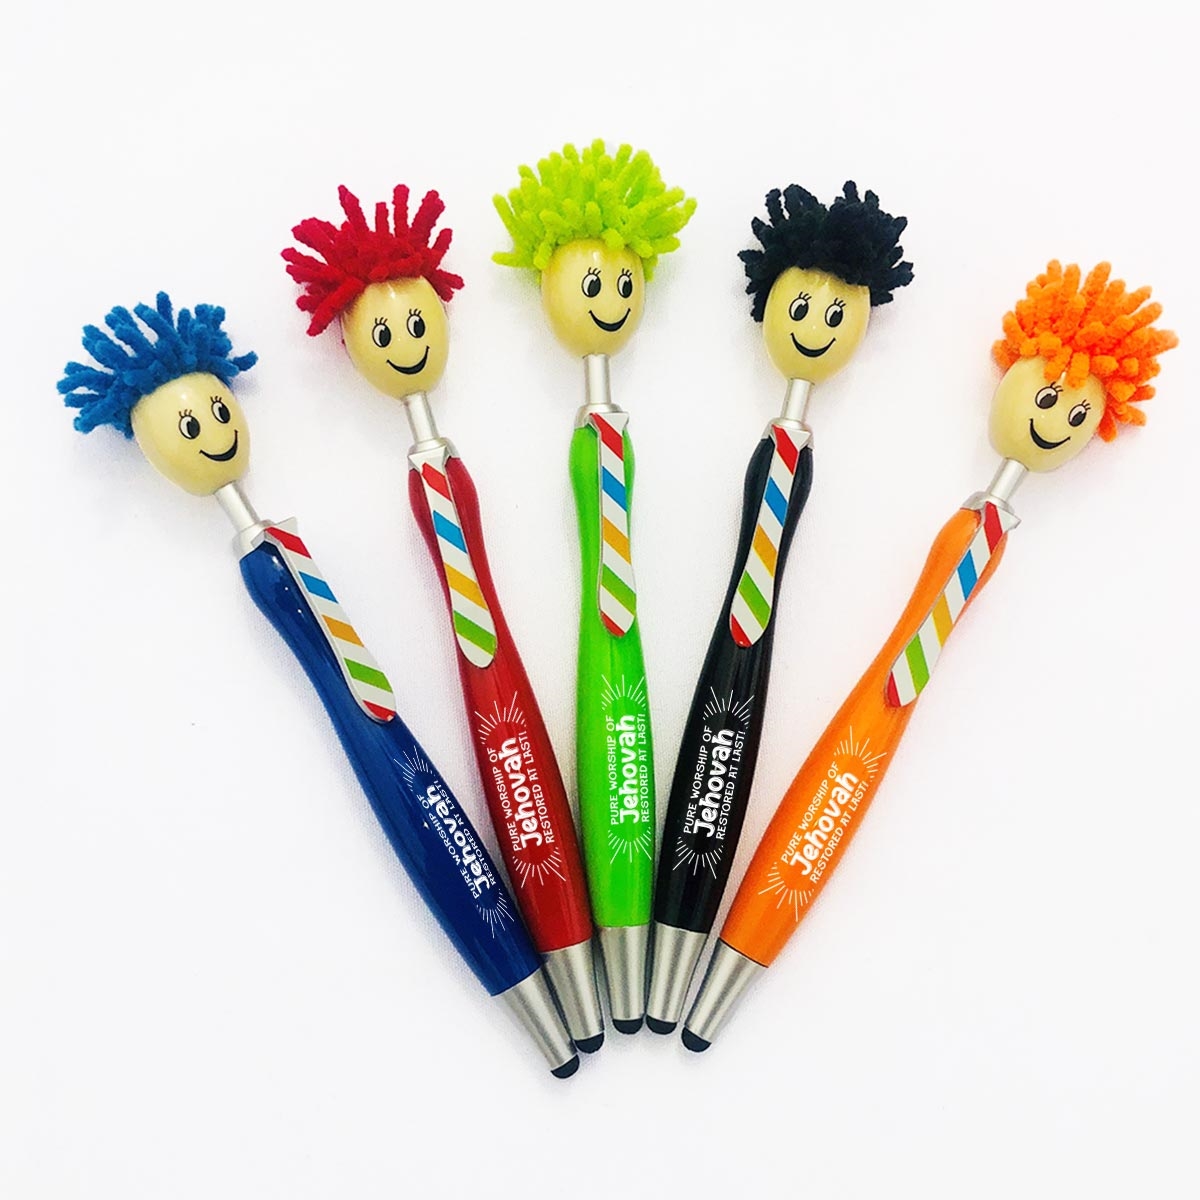 Fun Study Pen: 3-in-1- Pen/Stylus/Duster - Pure Worship - Set of 5 (Assorted)